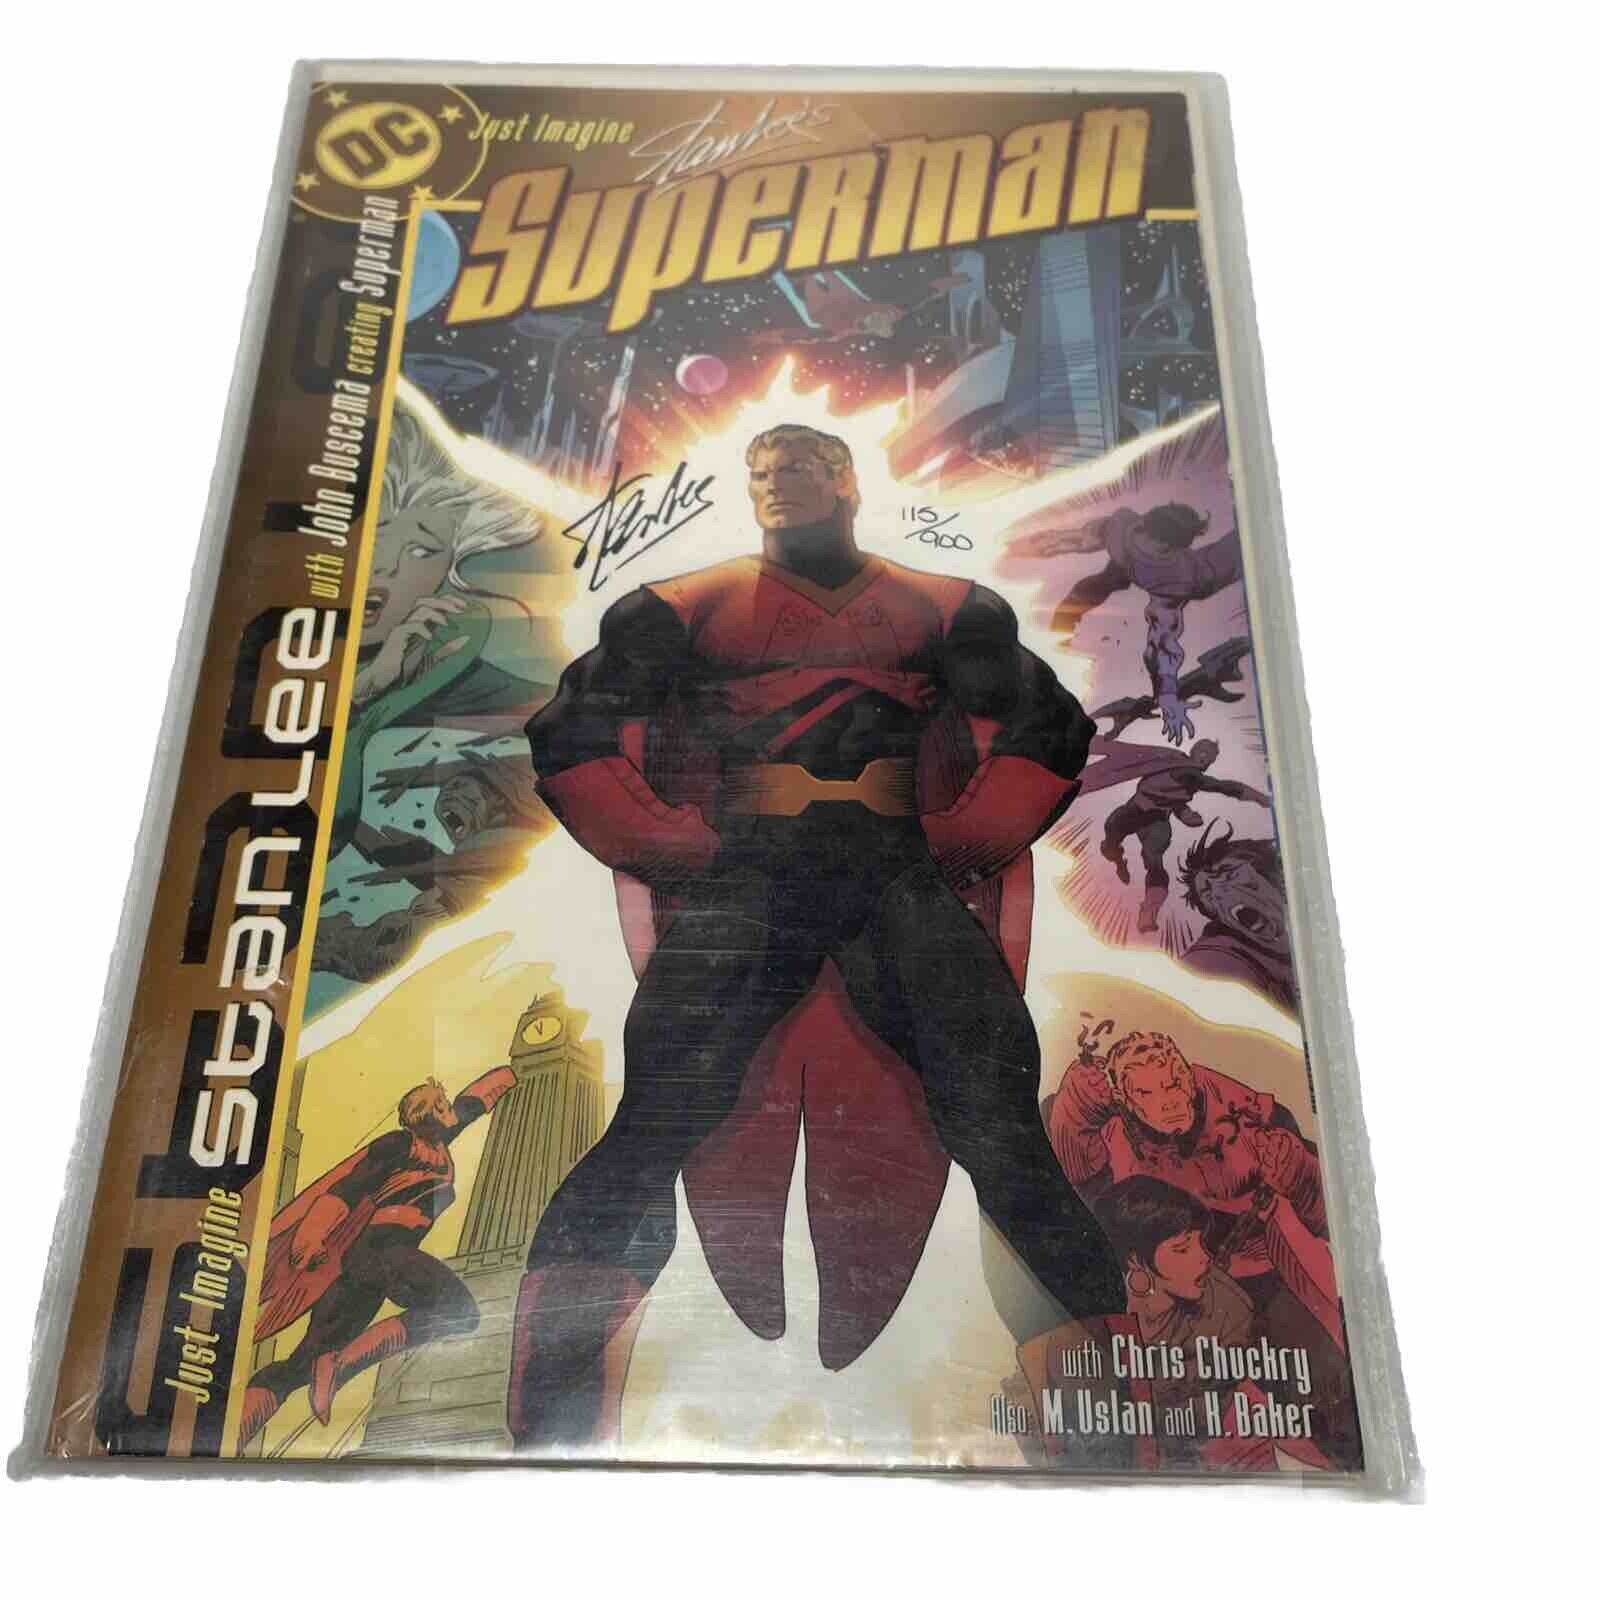 Just Imagine Stan Lee\'s Superman Autographed by Stan Lee Cert. Of Auth. 115/900